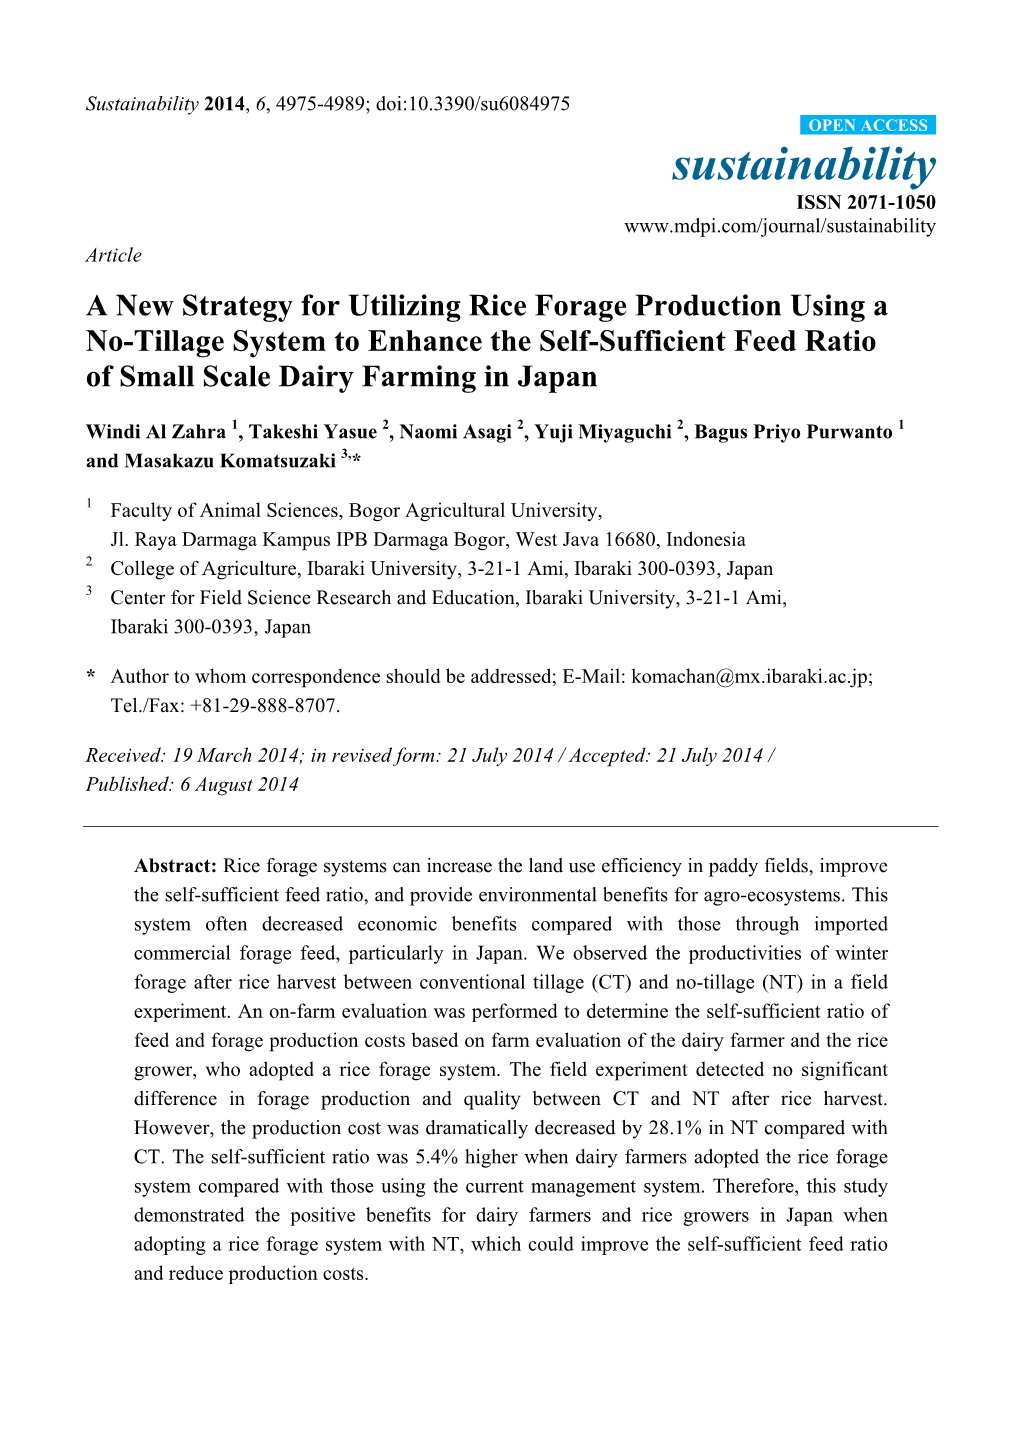 A New Strategy for Utilizing Rice Forage Production Using a No-Tillage System to Enhance the Self-Sufficient Feed Ratio of Small Scale Dairy Farming in Japan